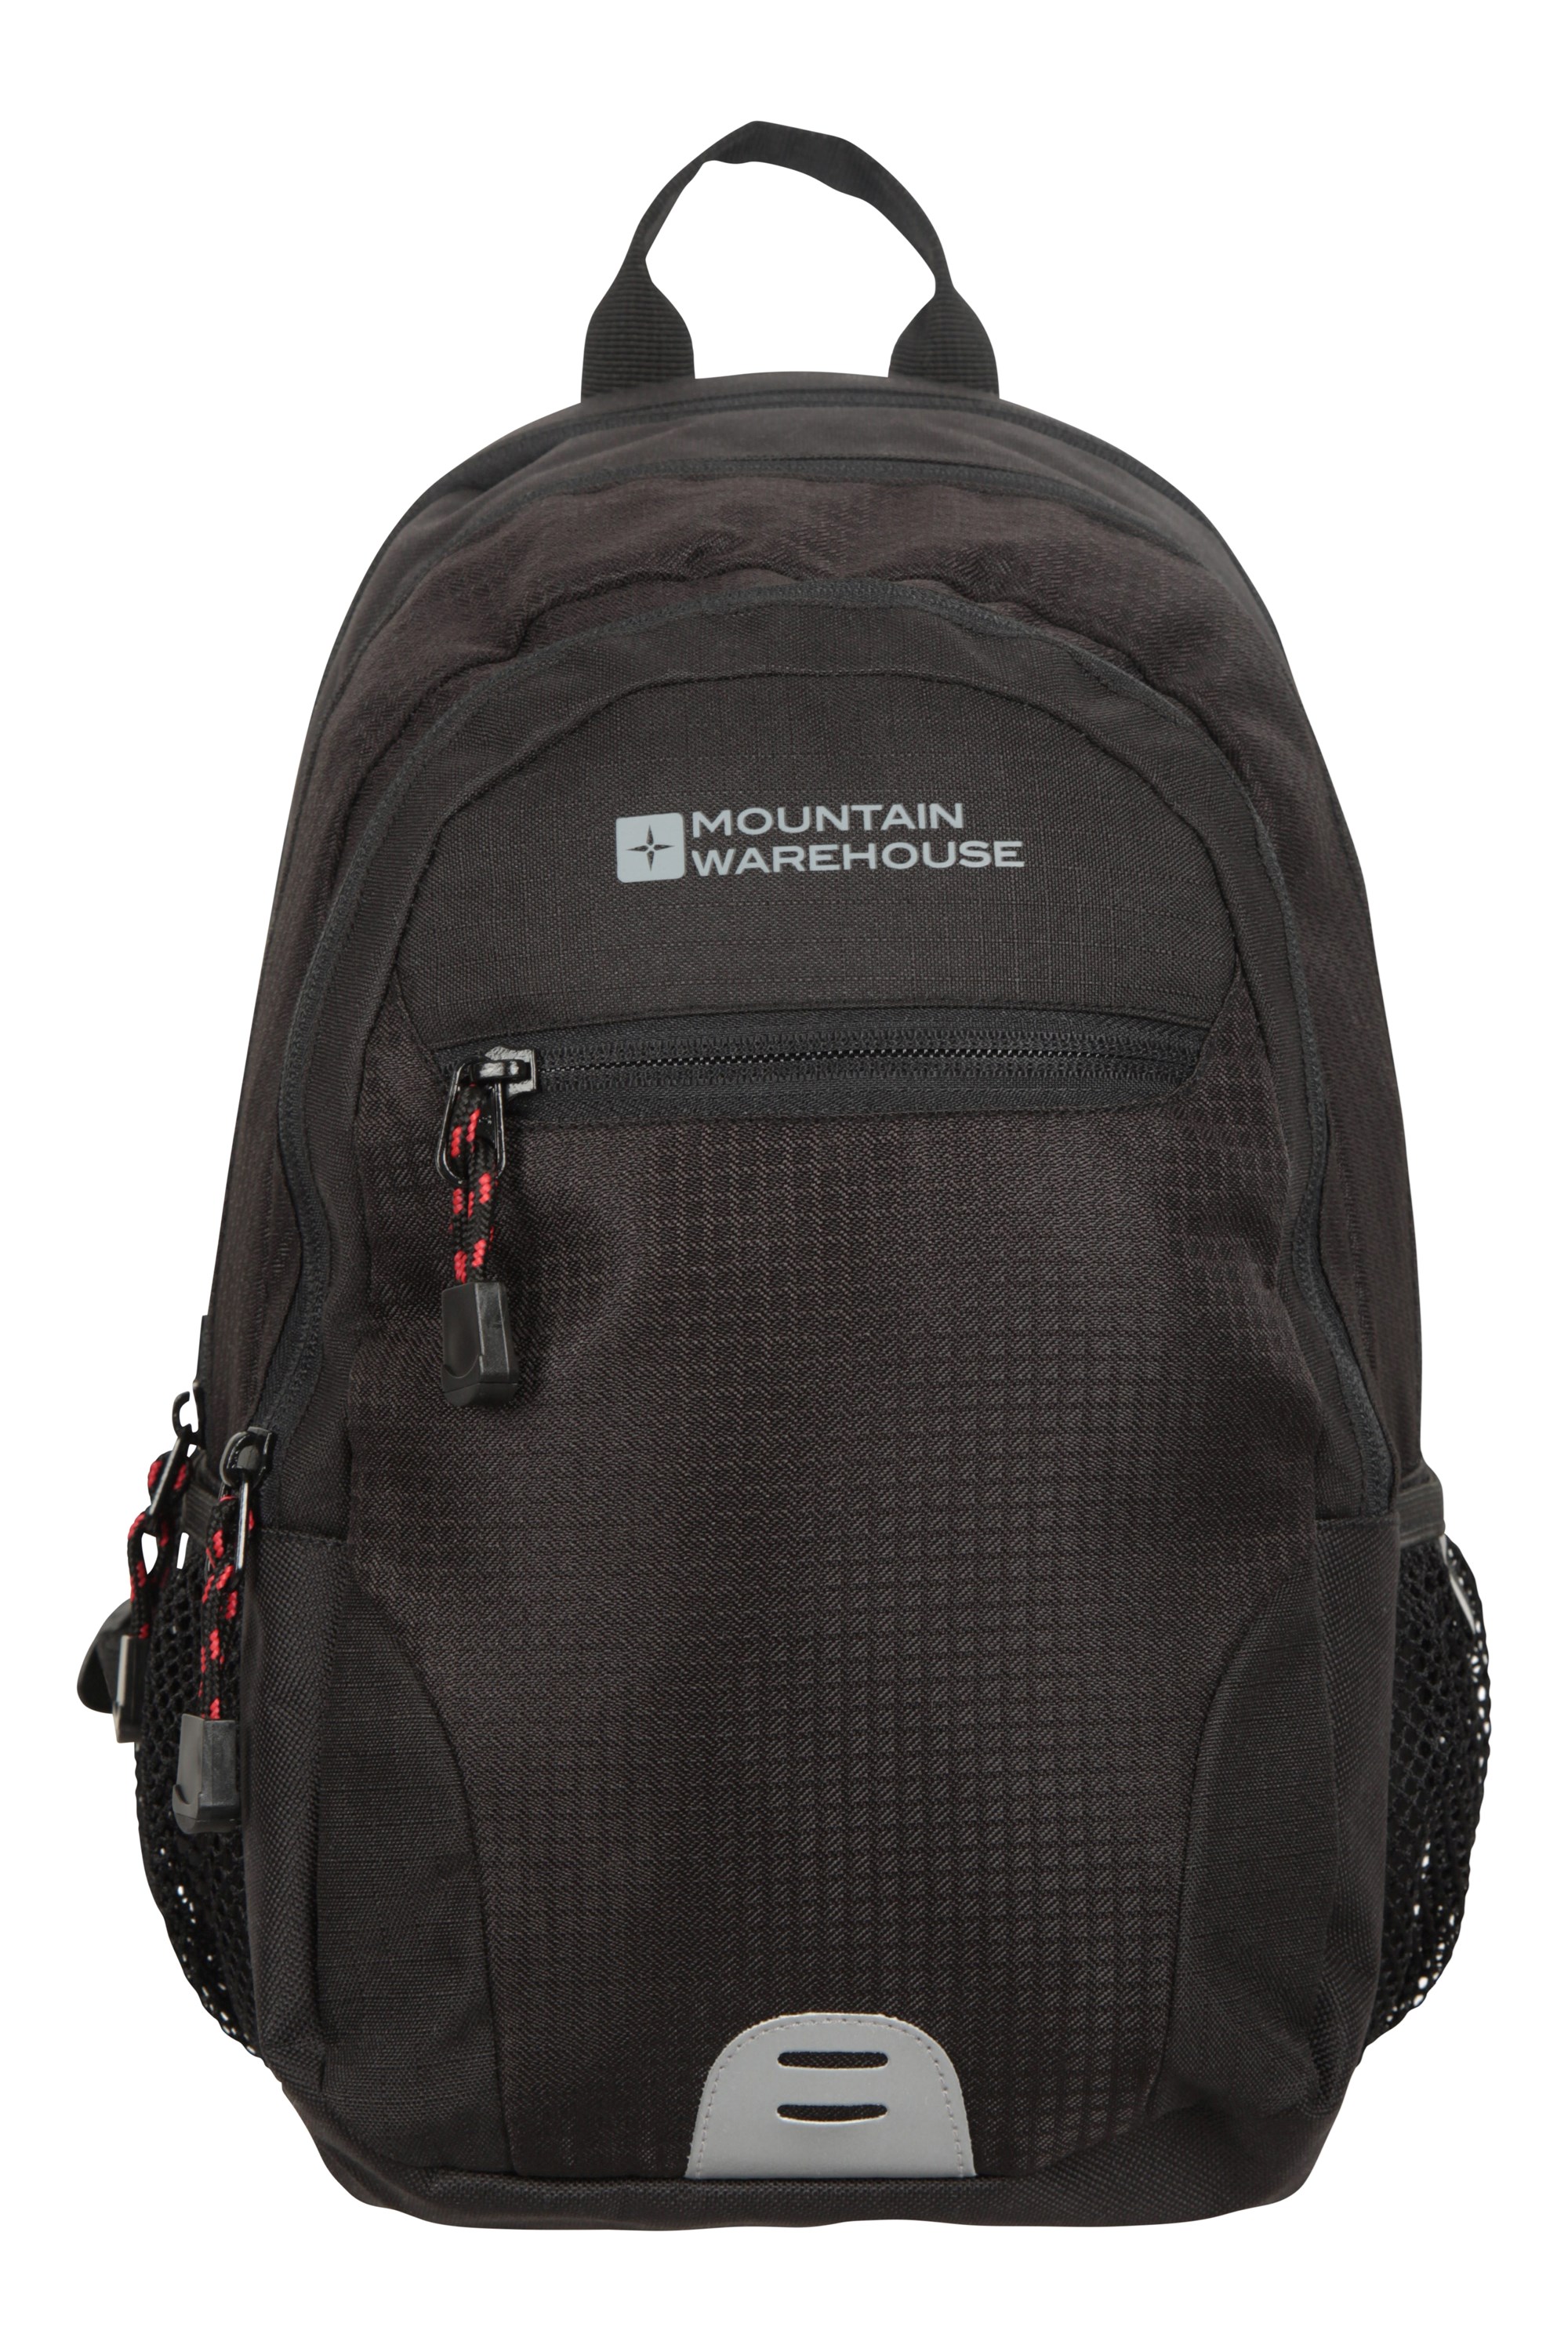 Quest 12L Backpack - Grey